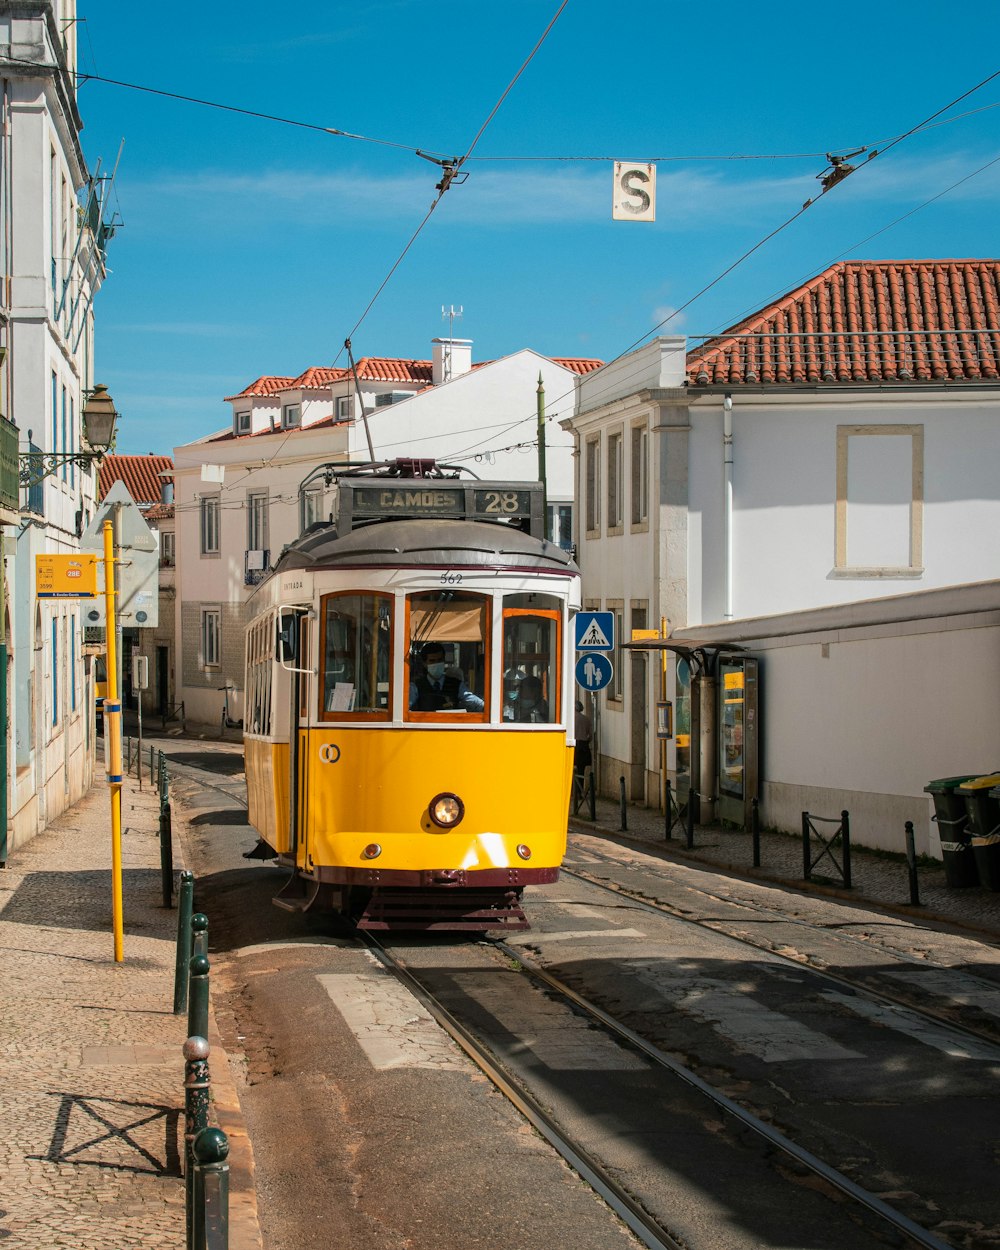 a yellow trolley is going down the tracks